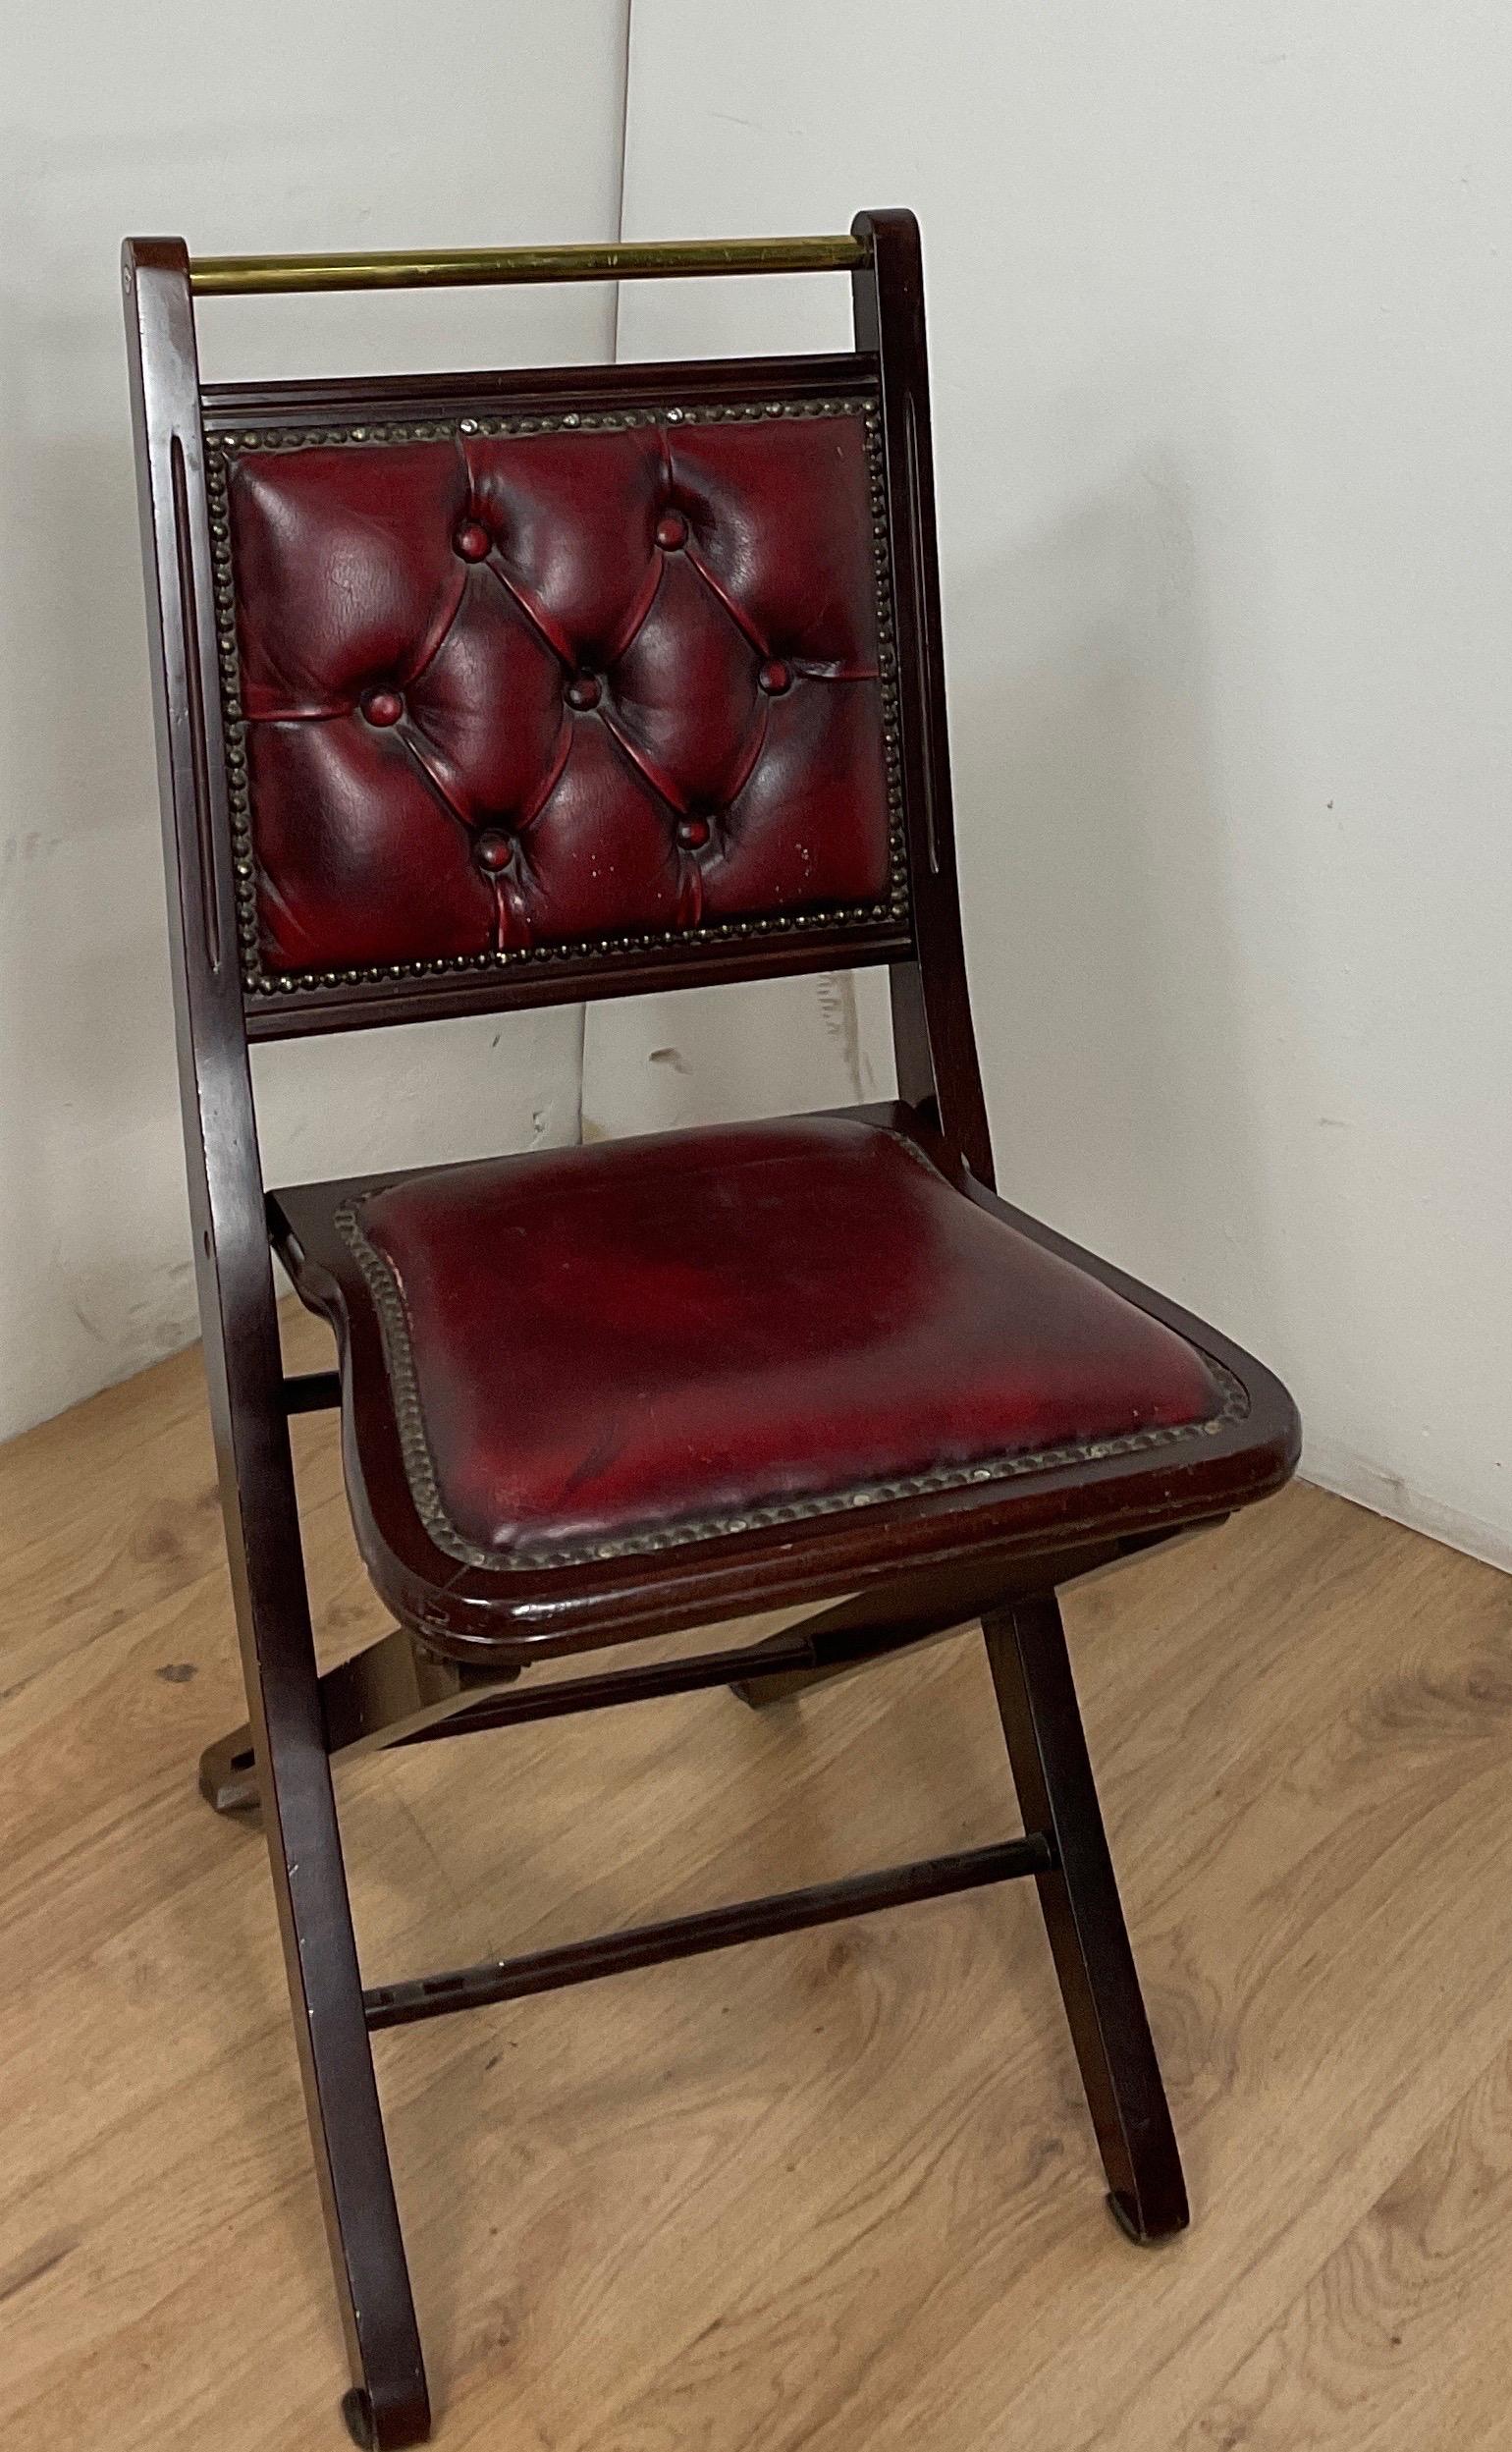 Navy style folding chair in leather with capiton workmanship

Artisanal craft made in Italy

In classic fashion red and antique red leather.